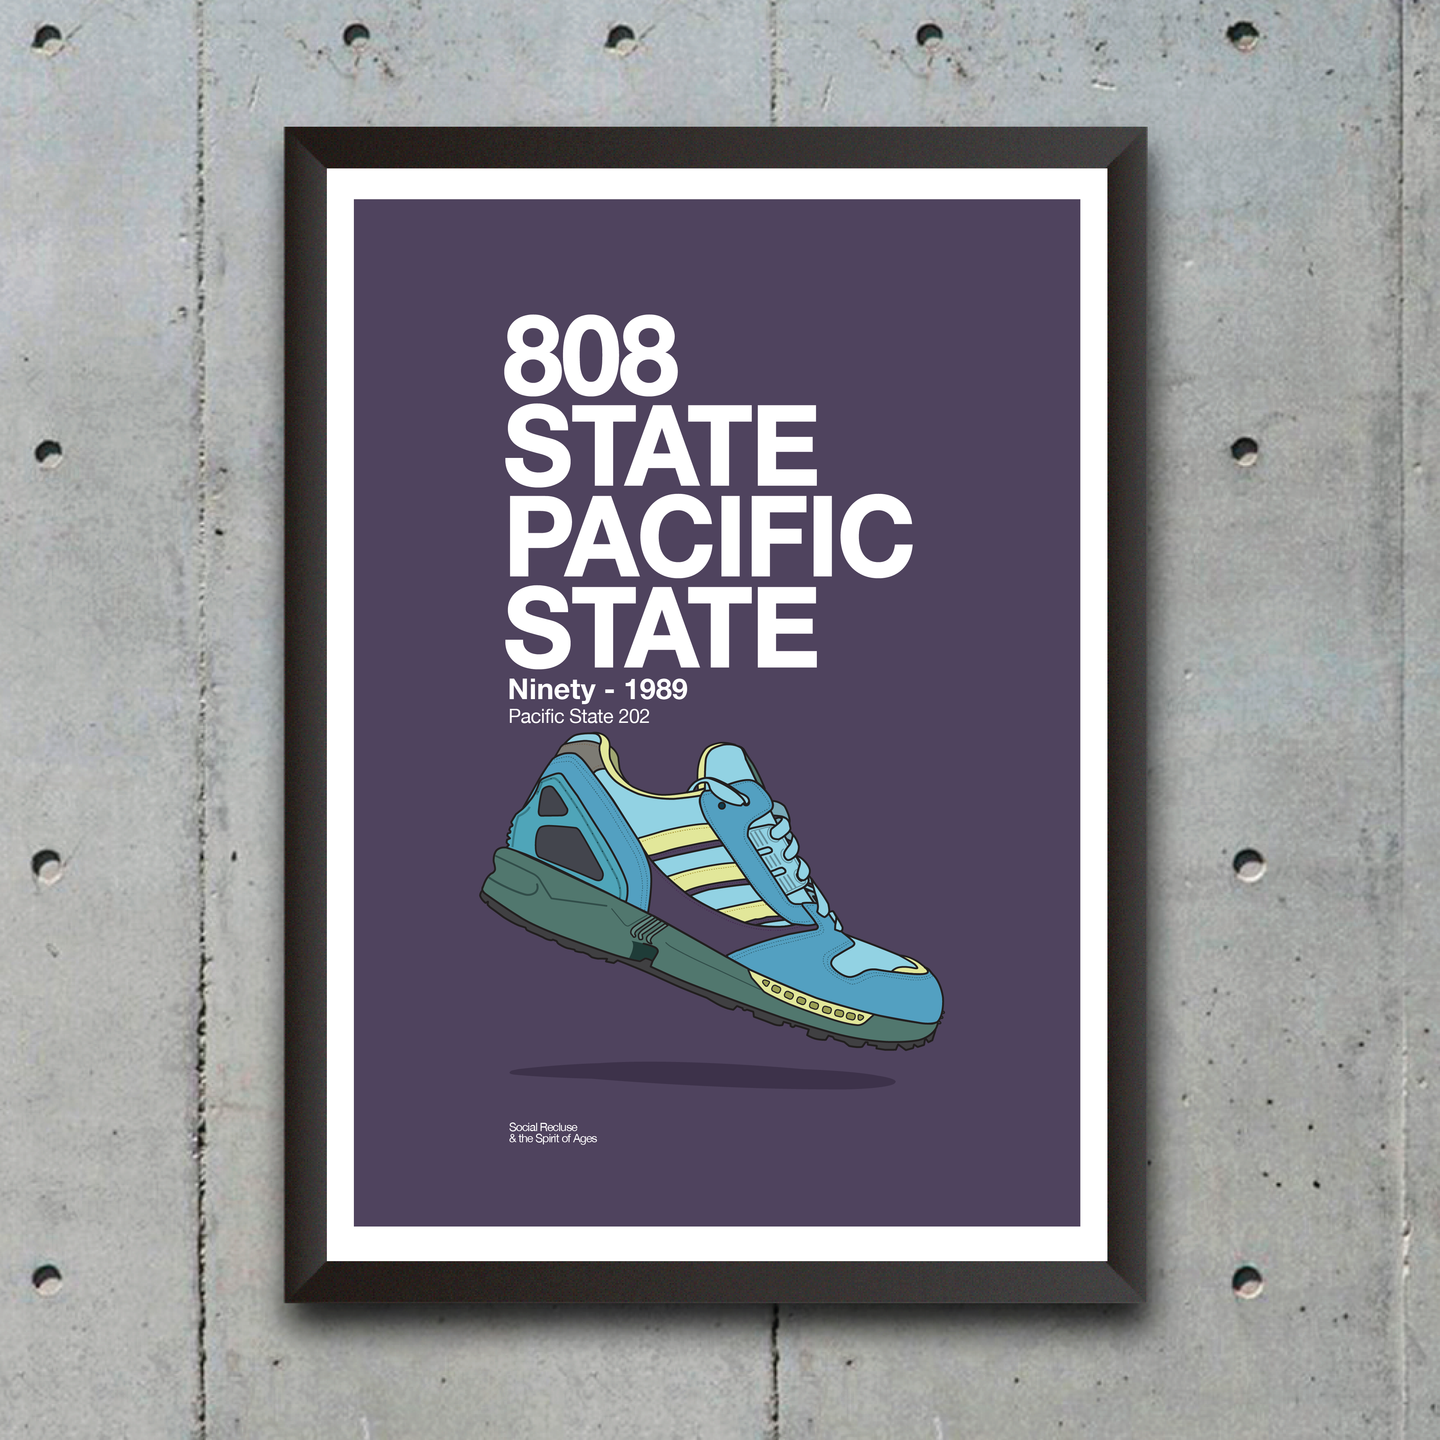 808 STATE PACIFIC STATE - PRINT